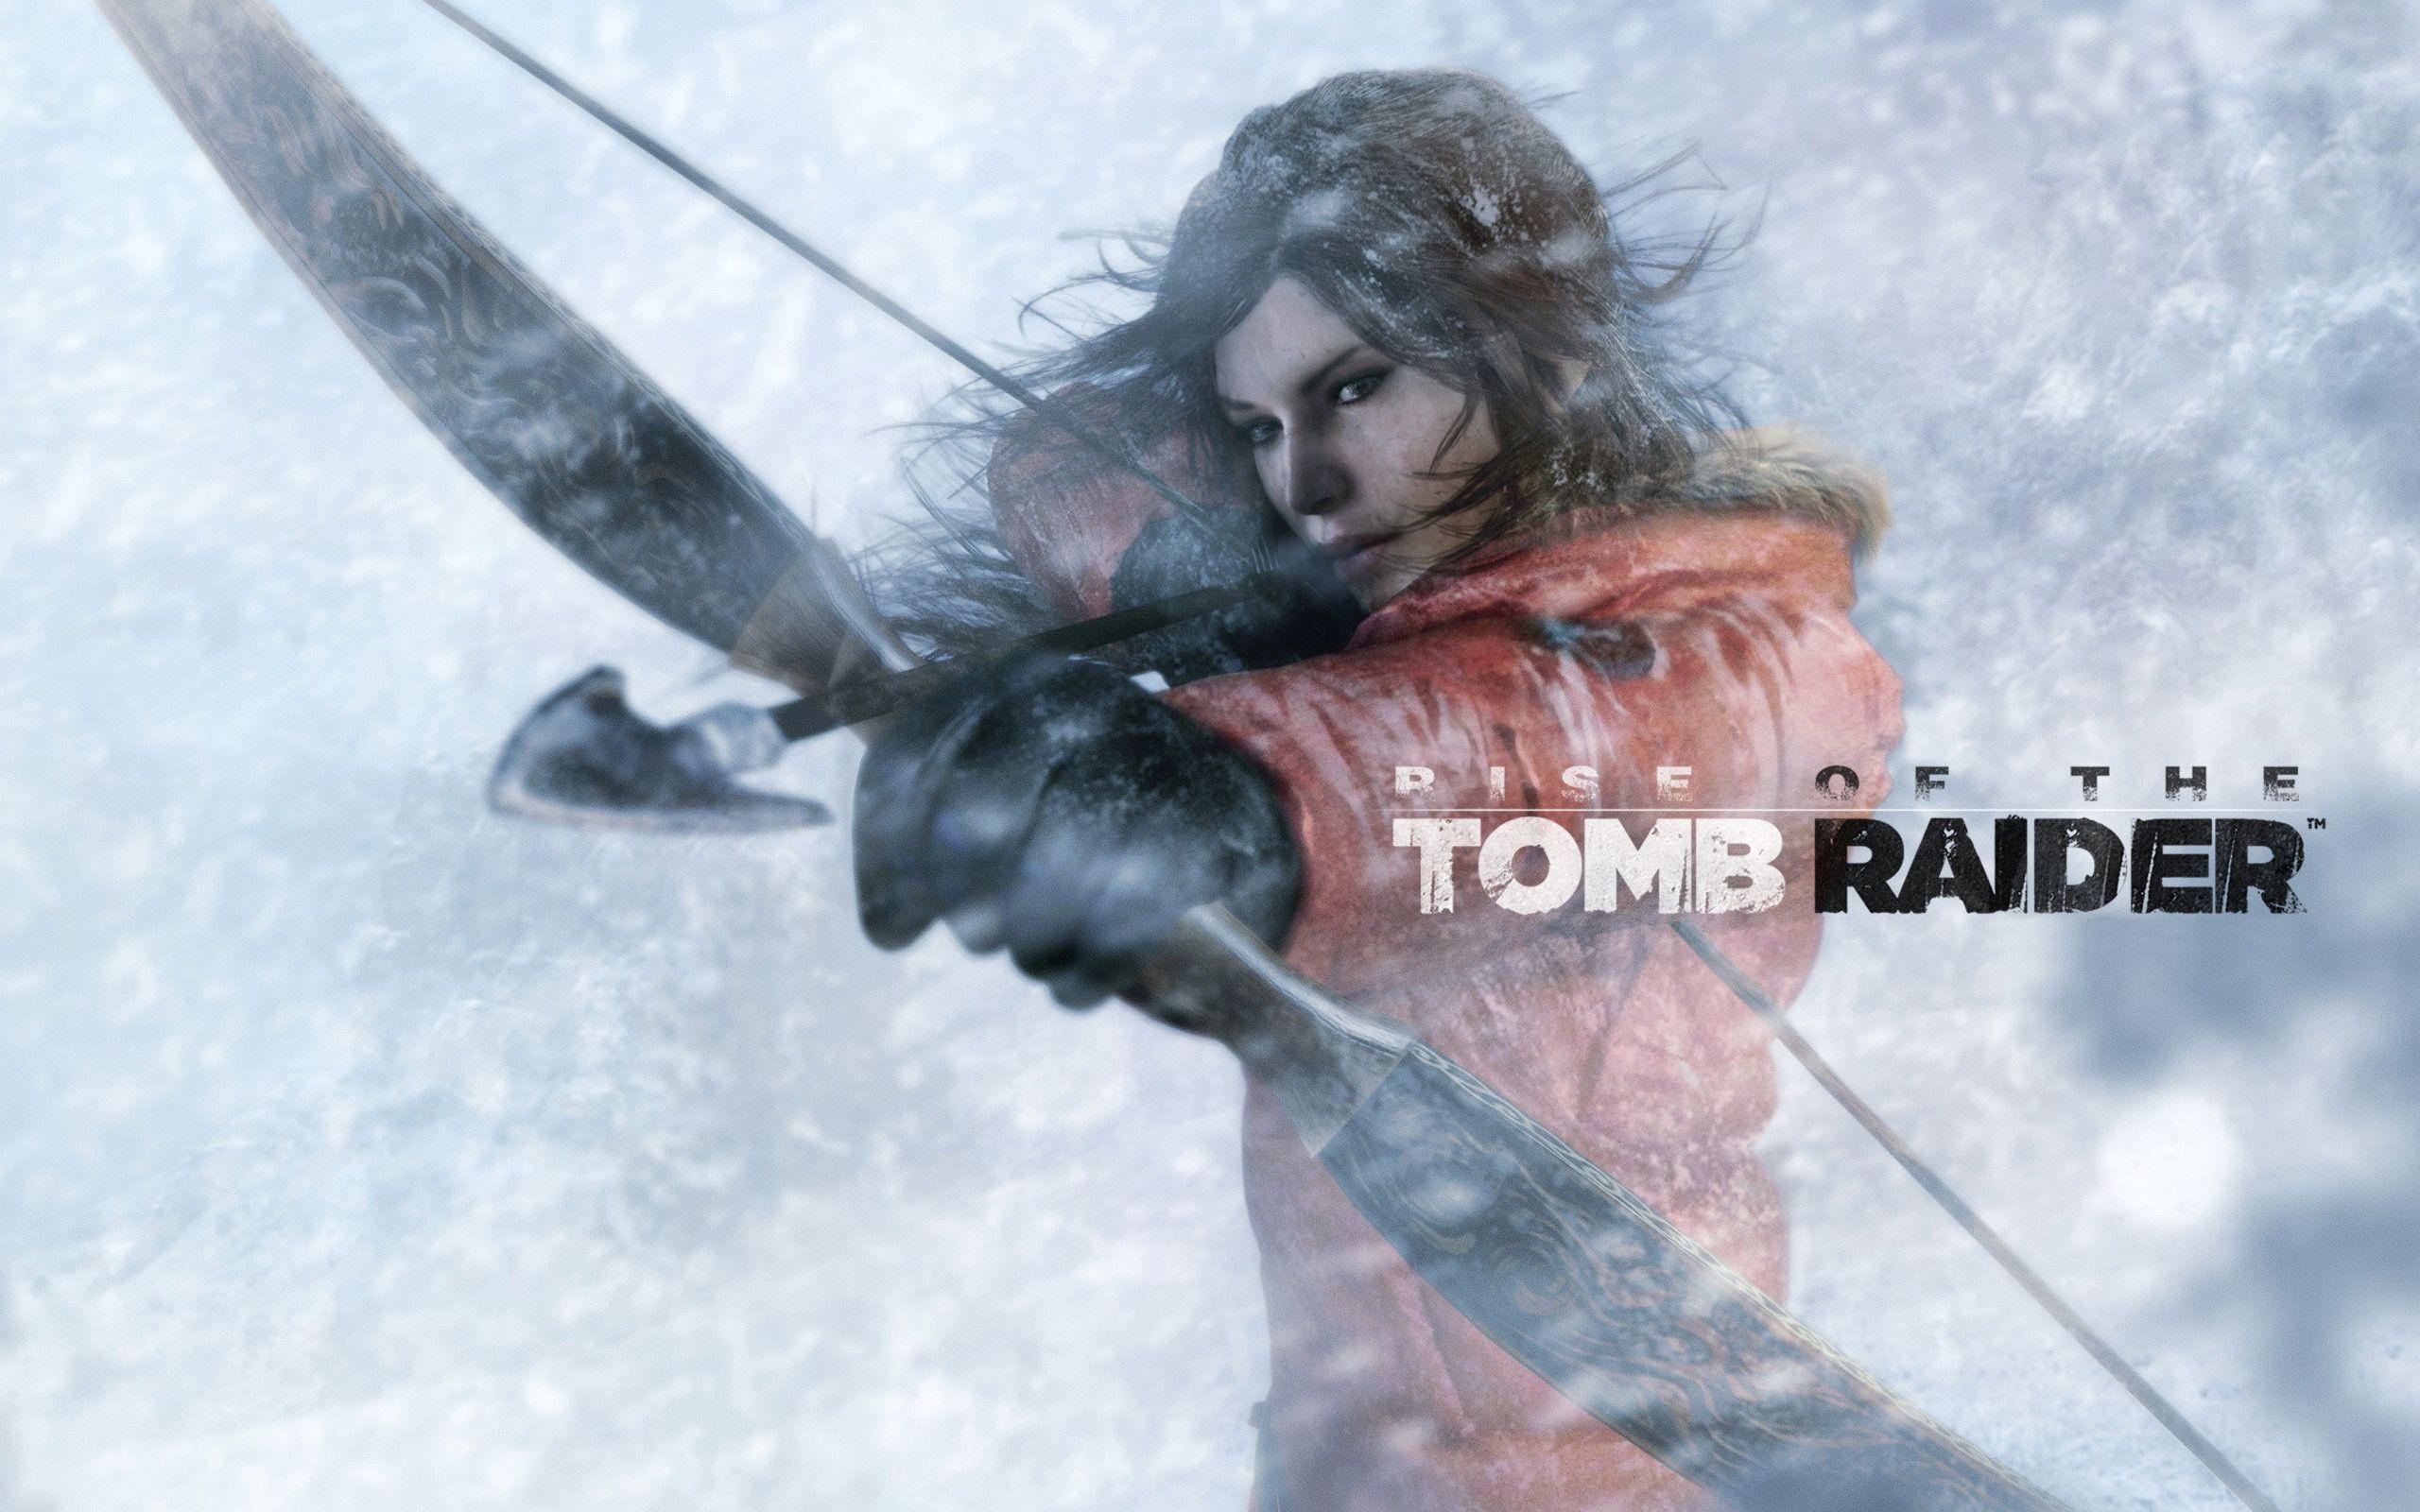 Rise of the Tomb Raider Launching On PS4 October 11 with Loads